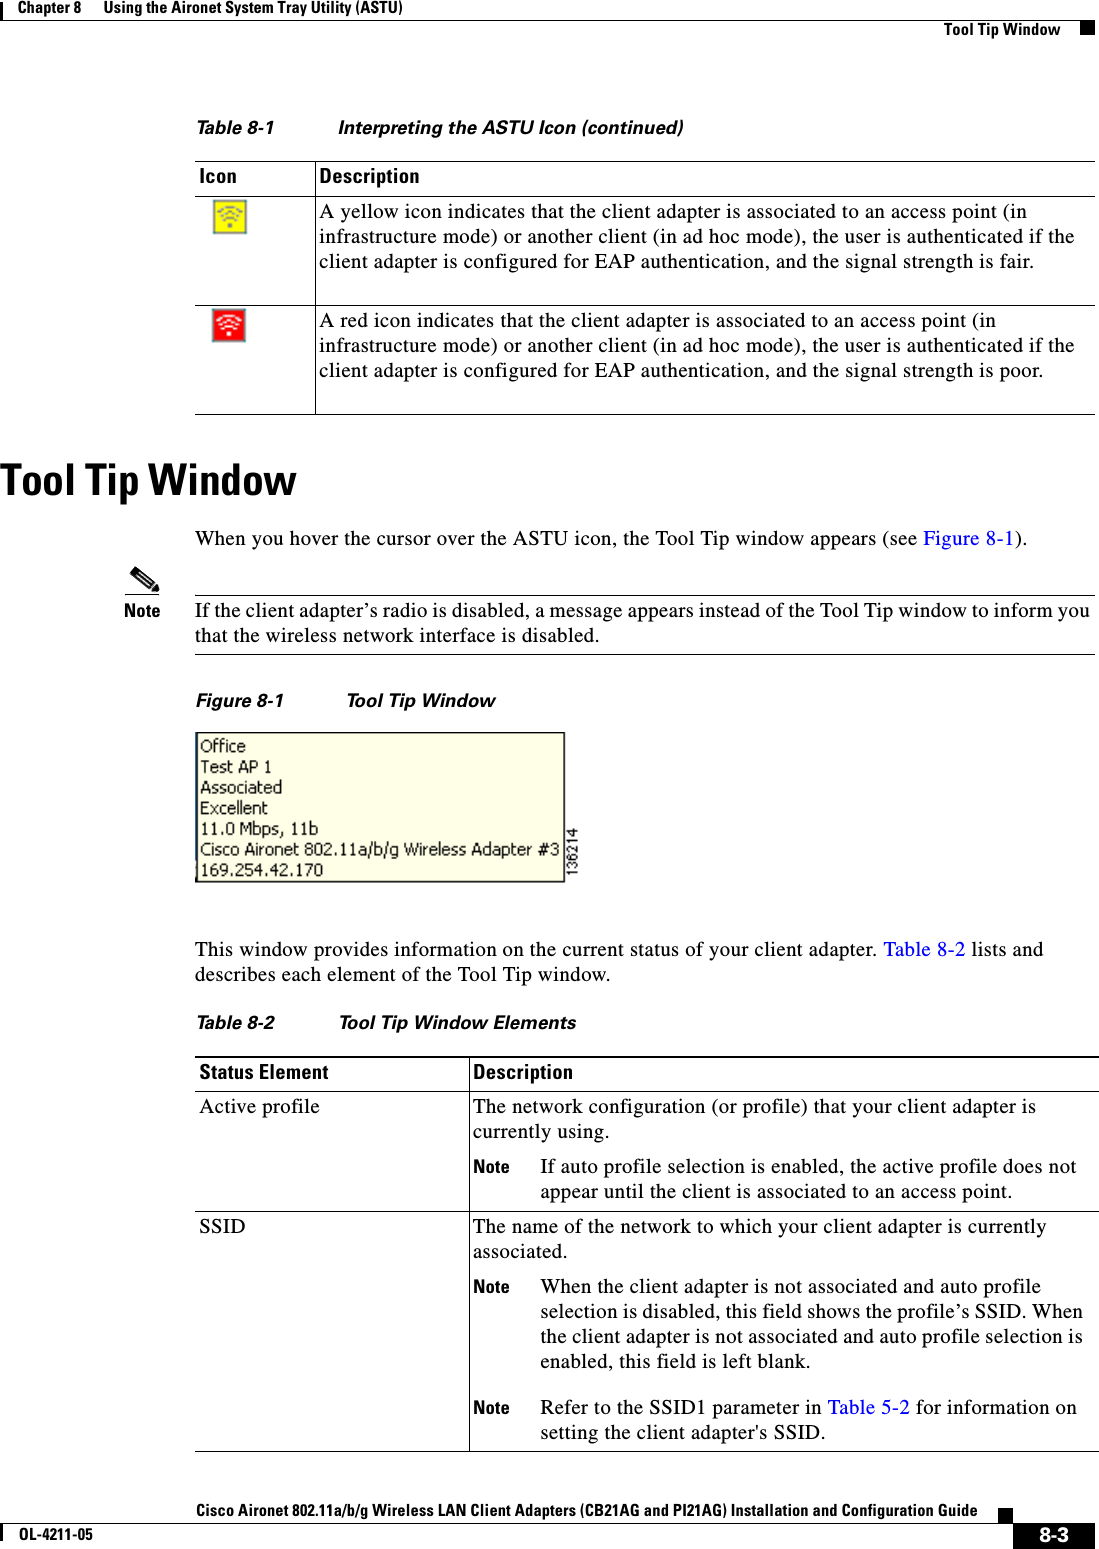 8-3Cisco Aironet 802.11a/b/g Wireless LAN Client Adapters (CB21AG and PI21AG) Installation and Configuration GuideOL-4211-05Chapter 8      Using the Aironet System Tray Utility (ASTU)Tool Tip WindowTool Tip WindowWhen you hover the cursor over the ASTU icon, the Tool Tip window appears (see Figure 8-1).Note If the client adapter’s radio is disabled, a message appears instead of the Tool Tip window to inform you that the wireless network interface is disabled.Figure 8-1 Tool Tip WindowThis window provides information on the current status of your client adapter. Table 8-2 lists and describes each element of the Tool Tip window.A yellow icon indicates that the client adapter is associated to an access point (in infrastructure mode) or another client (in ad hoc mode), the user is authenticated if the client adapter is configured for EAP authentication, and the signal strength is fair.A red icon indicates that the client adapter is associated to an access point (in infrastructure mode) or another client (in ad hoc mode), the user is authenticated if the client adapter is configured for EAP authentication, and the signal strength is poor.Table 8-1 Interpreting the ASTU Icon (continued)Icon DescriptionTable 8-2 Tool Tip Window ElementsStatus Element DescriptionActive profile The network configuration (or profile) that your client adapter is currently using.Note If auto profile selection is enabled, the active profile does not appear until the client is associated to an access point.SSID The name of the network to which your client adapter is currently associated.Note When the client adapter is not associated and auto profile selection is disabled, this field shows the profile’s SSID. When the client adapter is not associated and auto profile selection is enabled, this field is left blank.Note Refer to the SSID1 parameter in Table 5-2 for information on setting the client adapter&apos;s SSID.